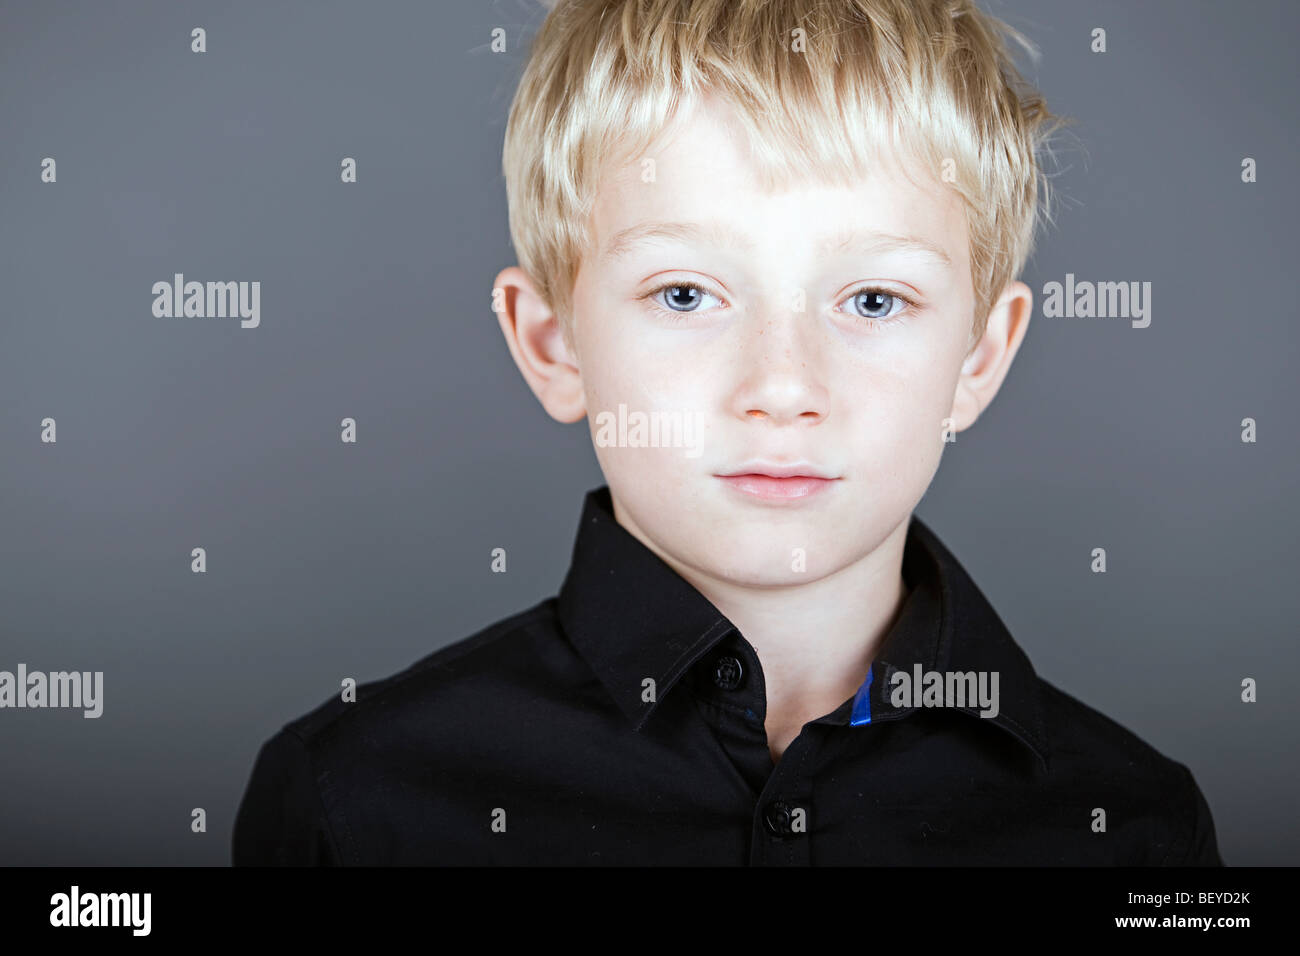 a wary and shy little boy looks concerned Stock Photo